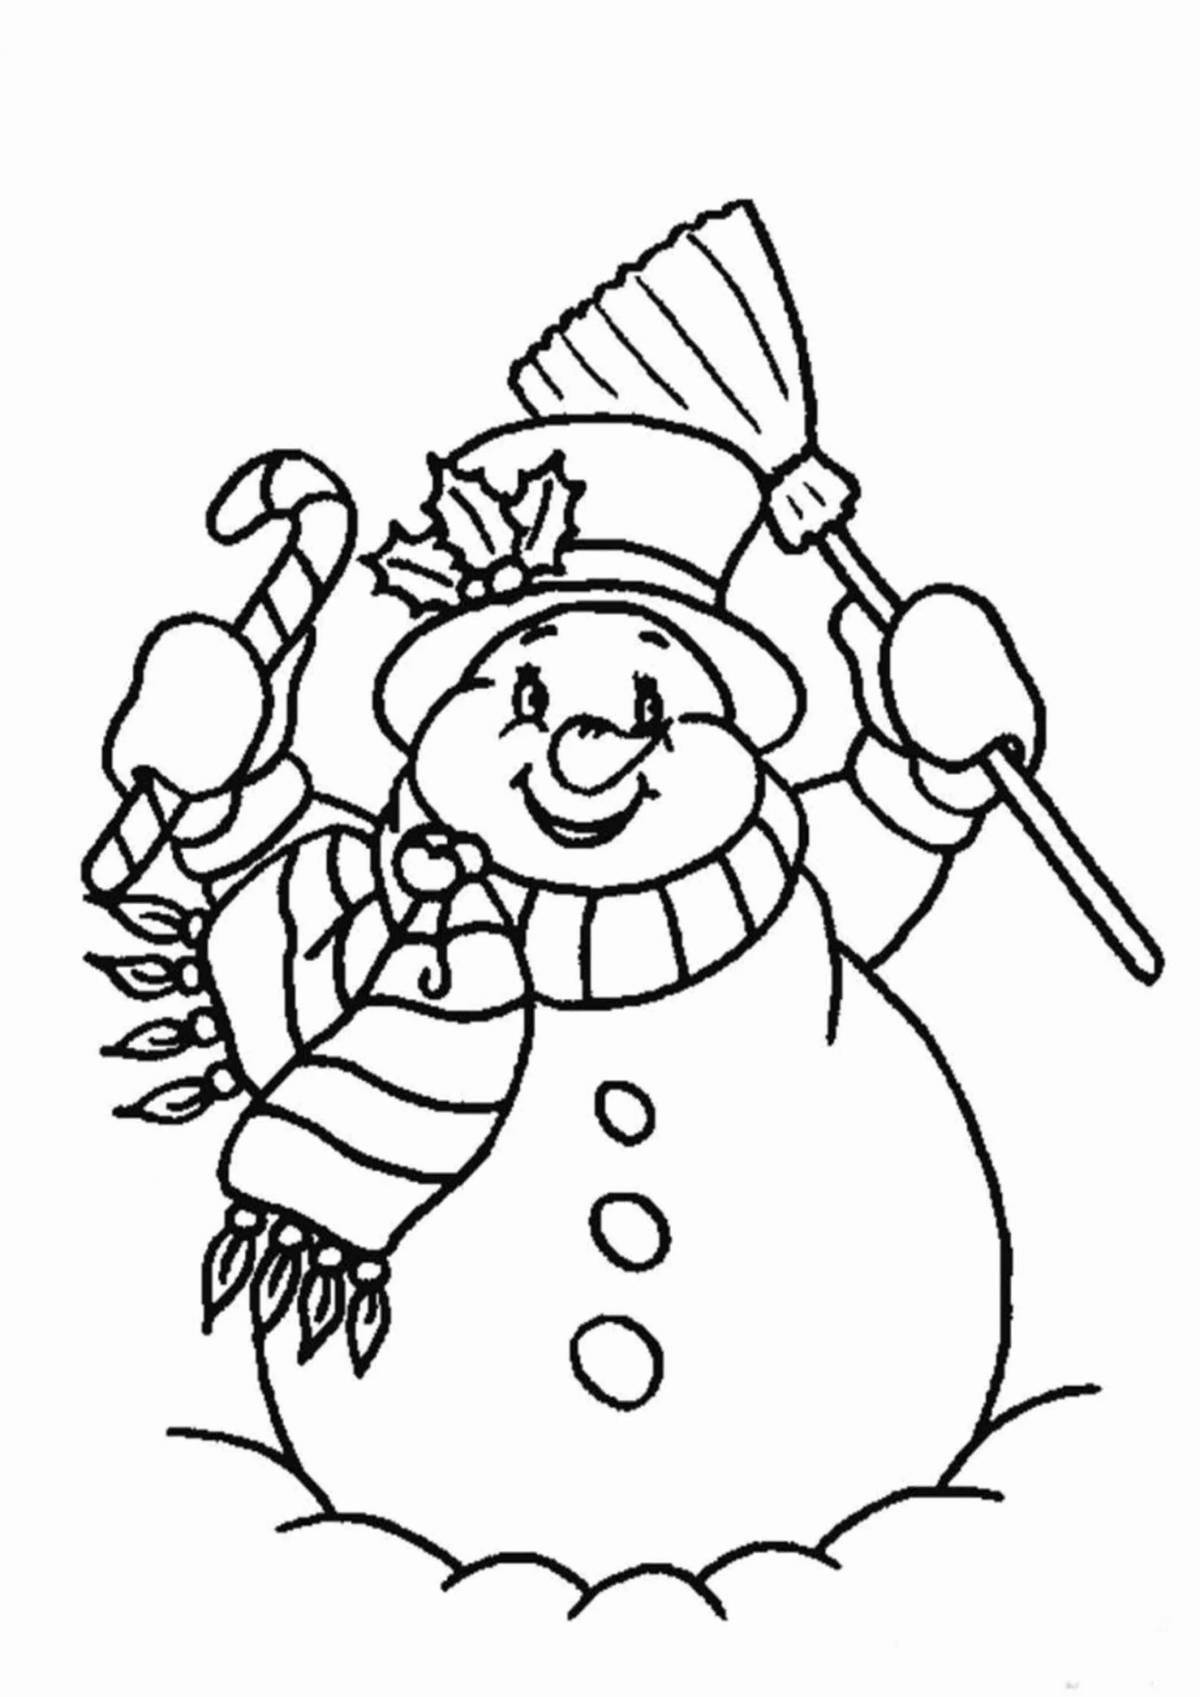 Christmas snowman coloring page